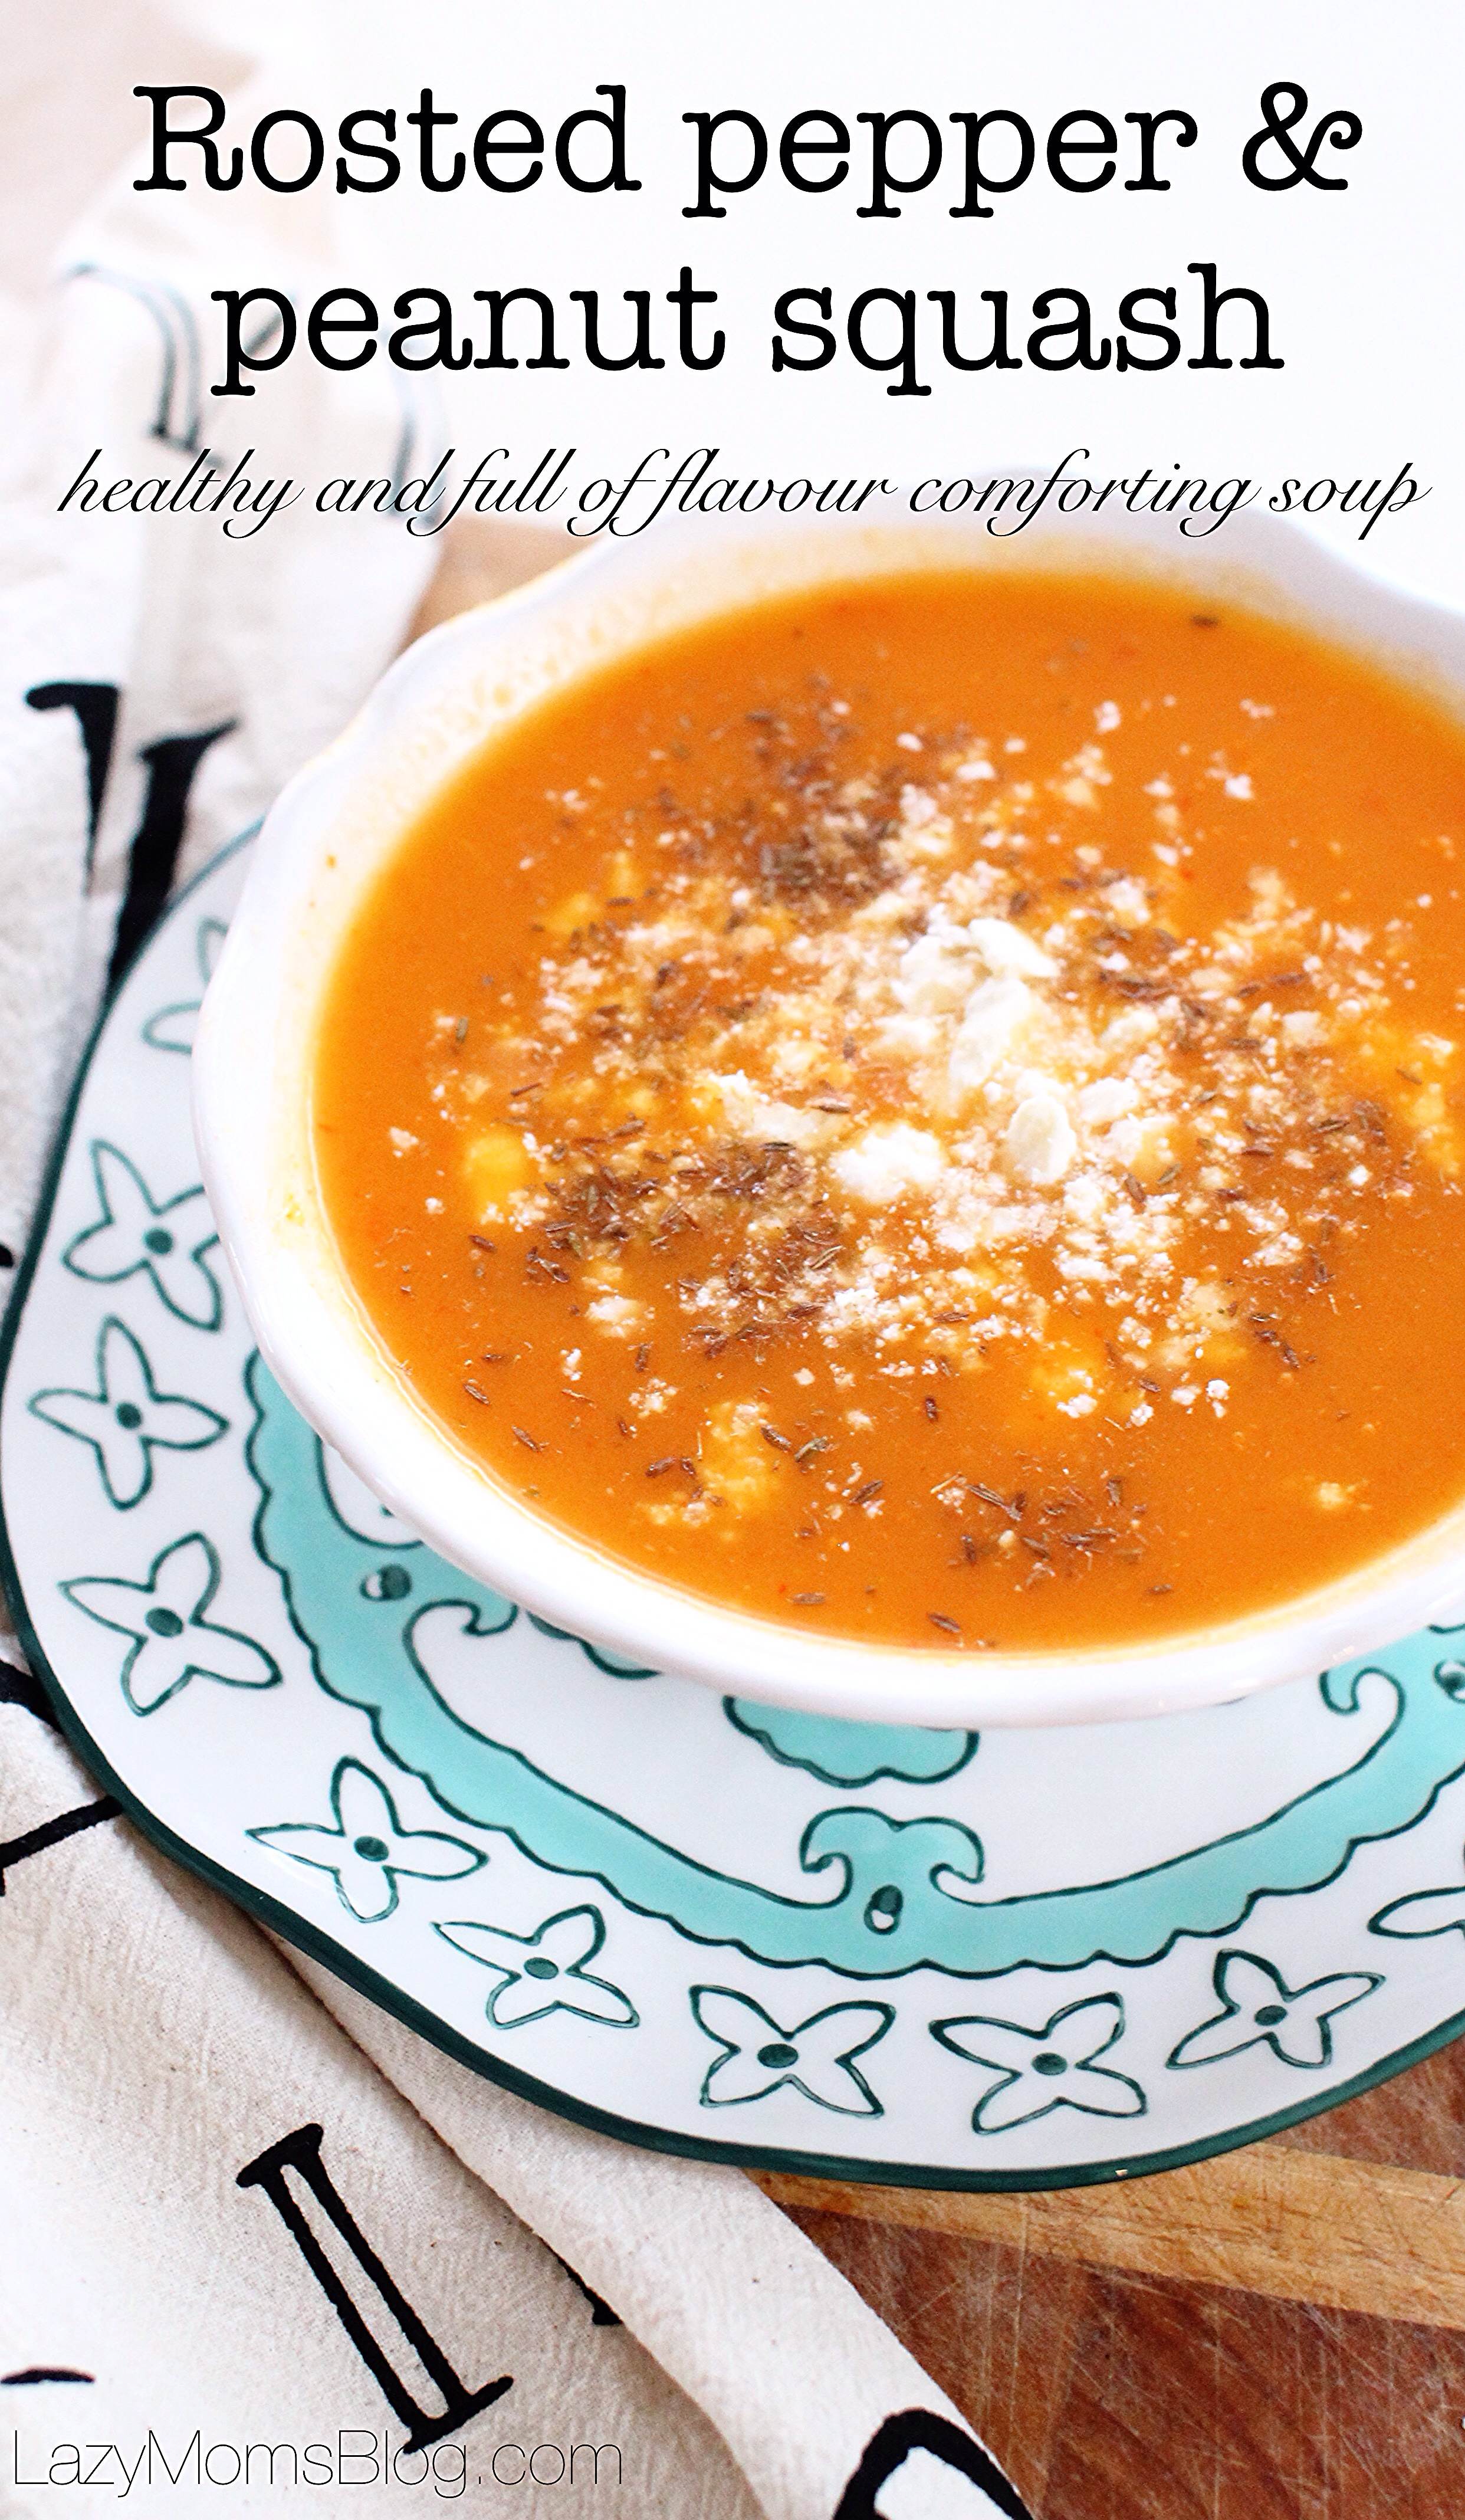 This roasted pepper and peanut squash soup is so easy to make, so healthy and so full of flavor! It's my new family favorite! #soup #healthy 